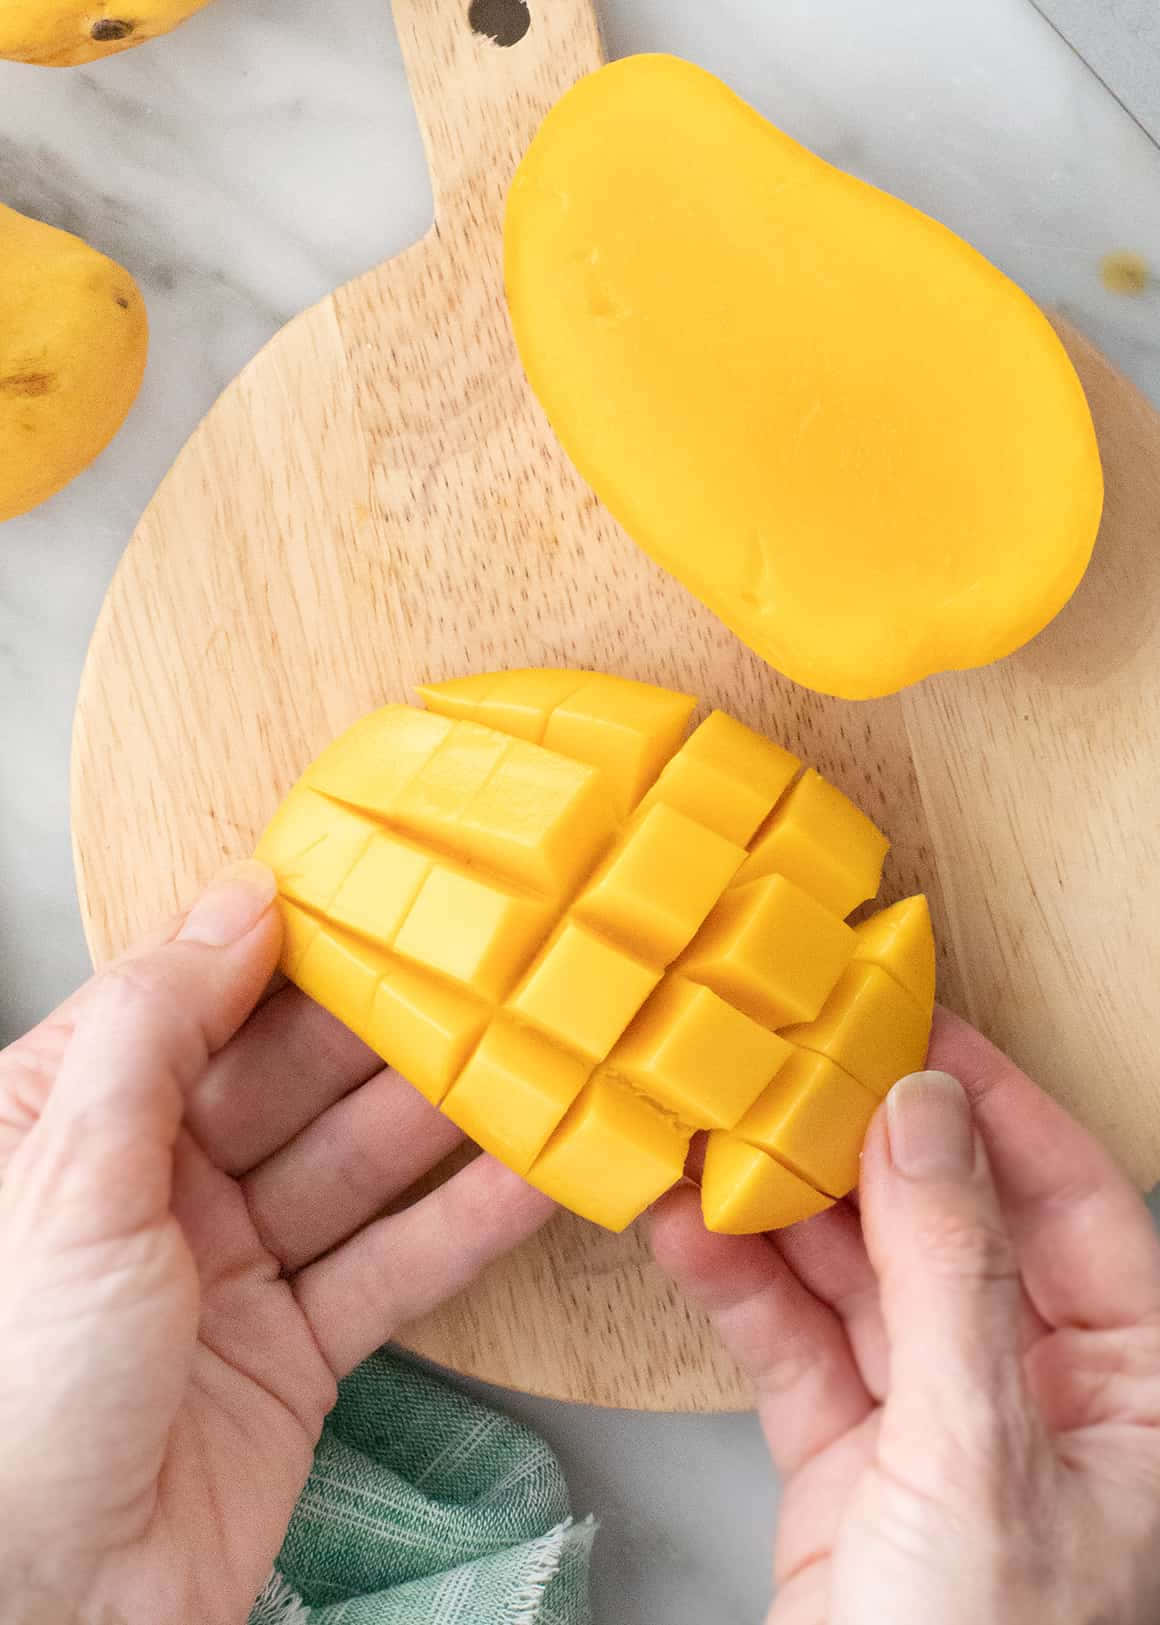 Indulge in the juicy goodness of a Mango